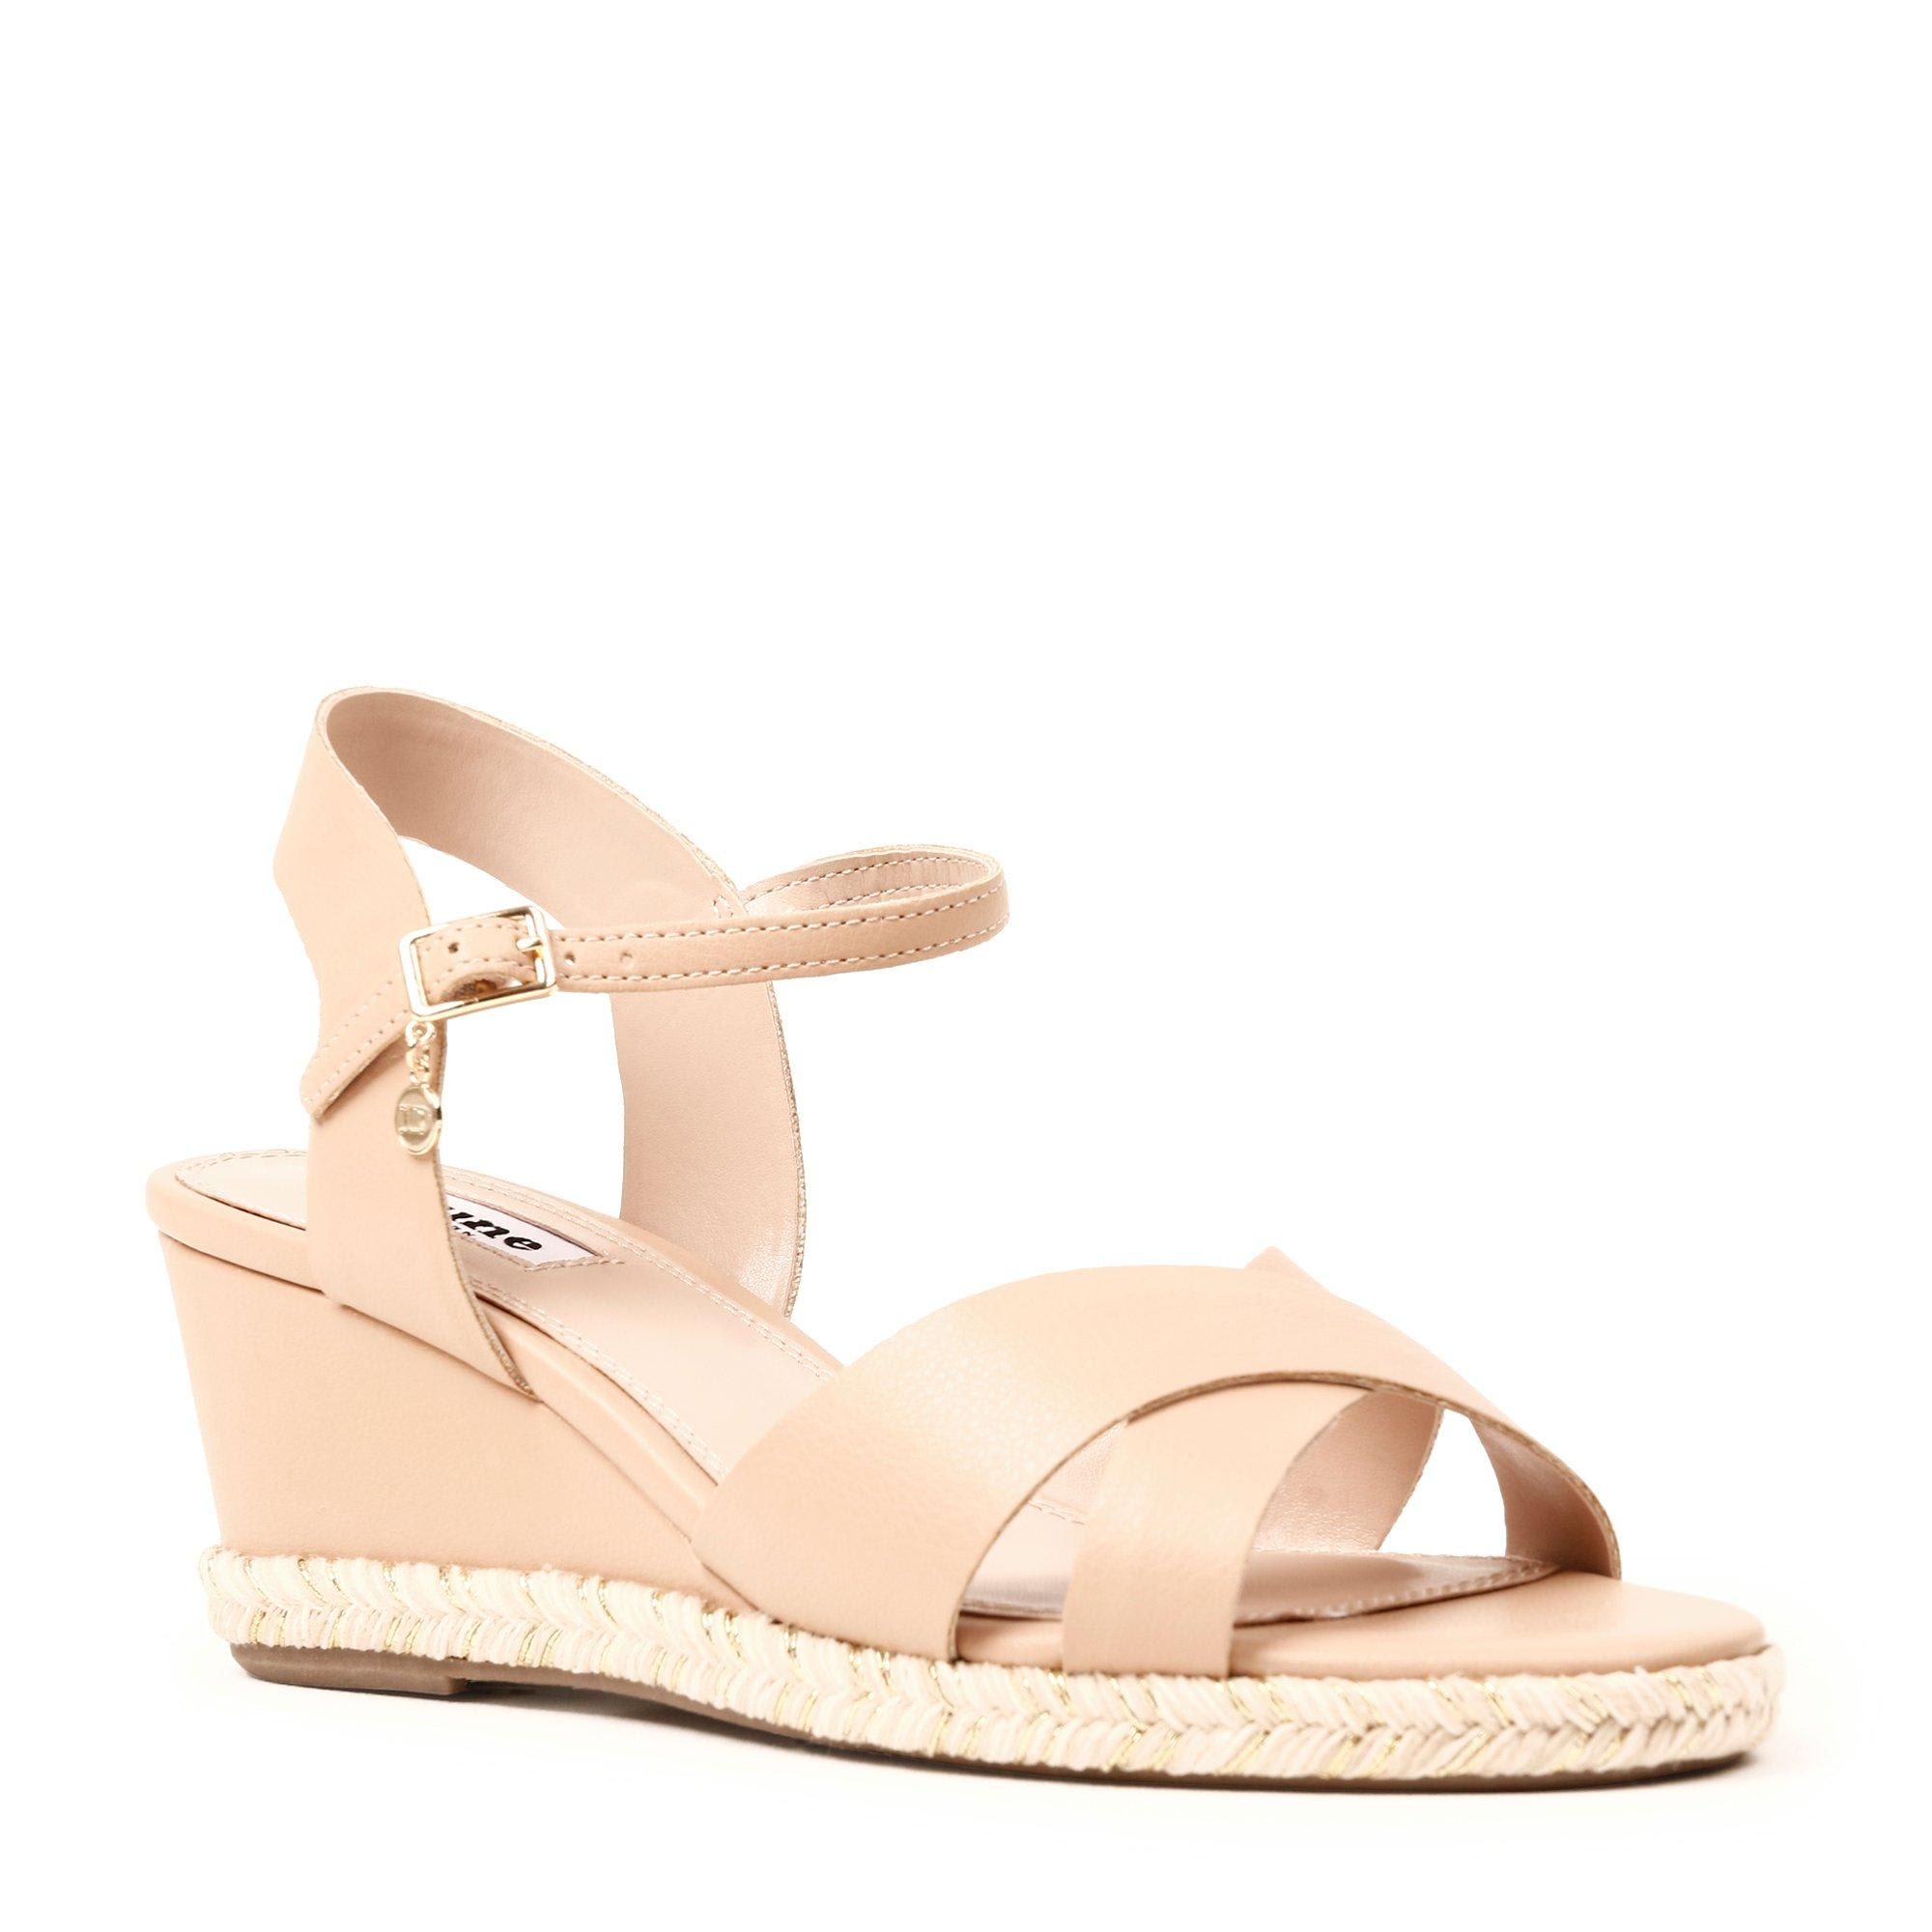 Elevate your summer looks with this wedge sandal from Dune London. Featuring crossover straps and an espadrille trim. It's finished with a mini logo charm at the strap.